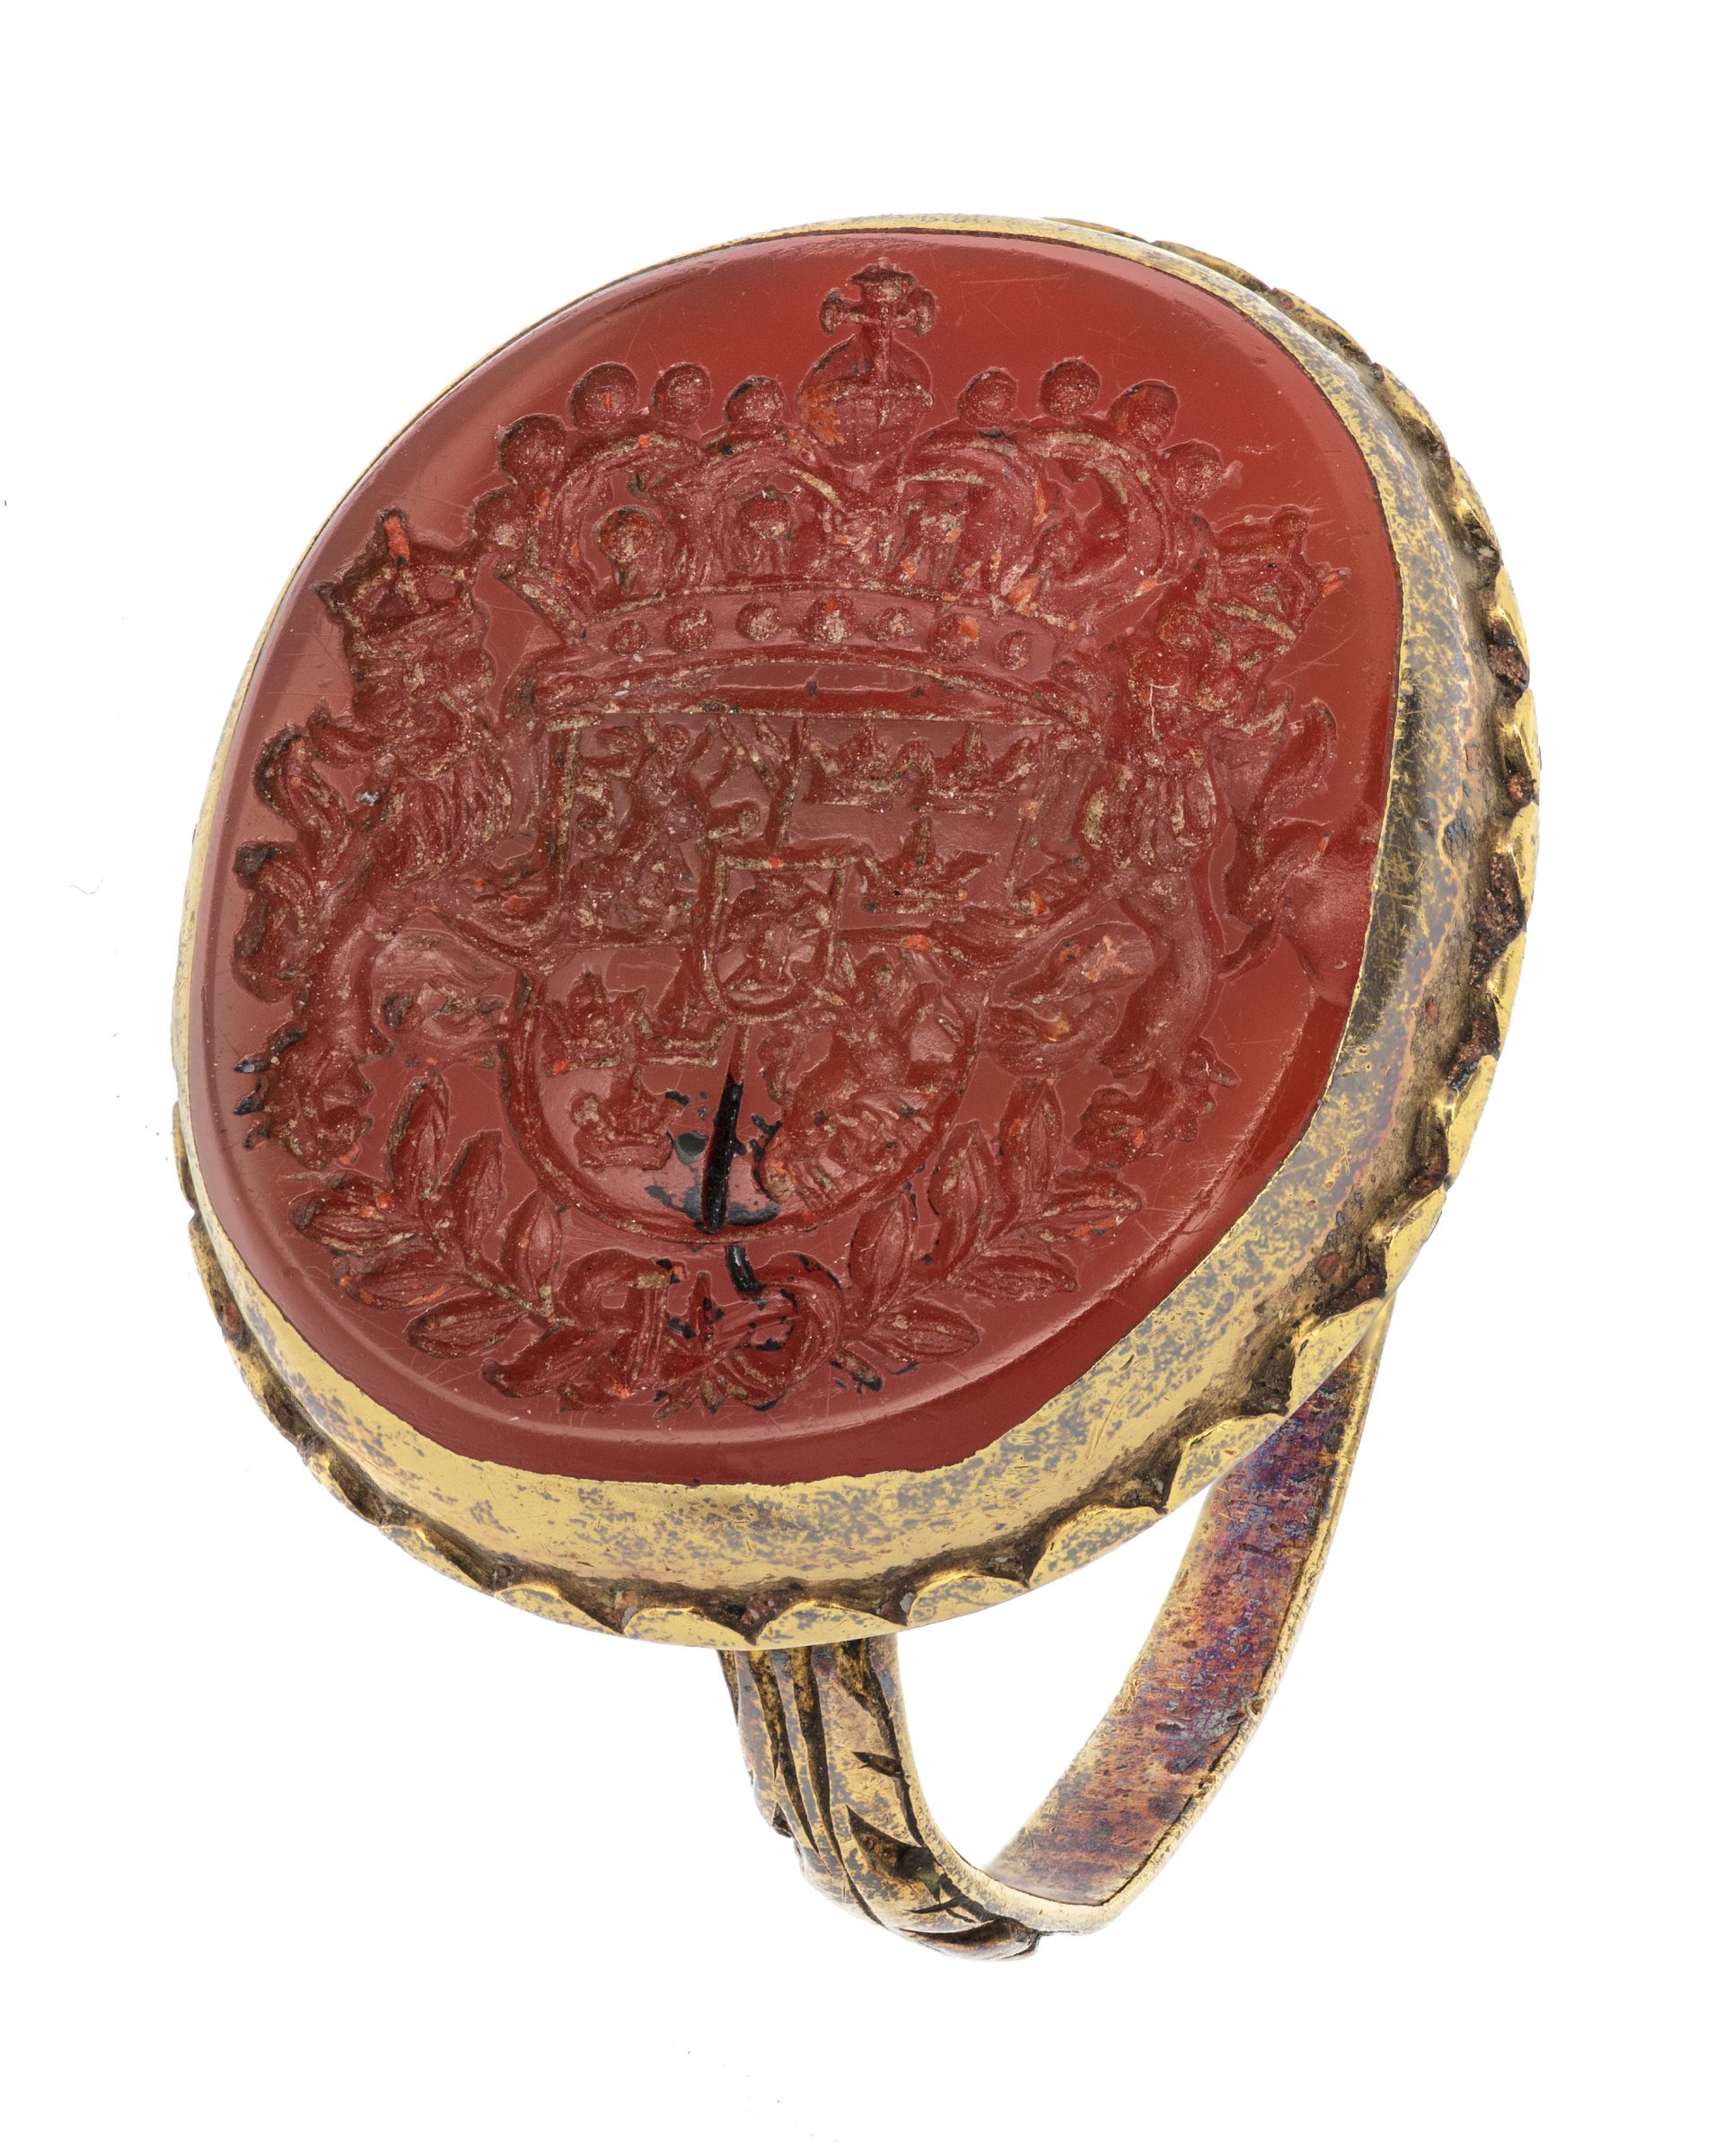 A ring of gold with a large red disc engraved with a coat of arms.